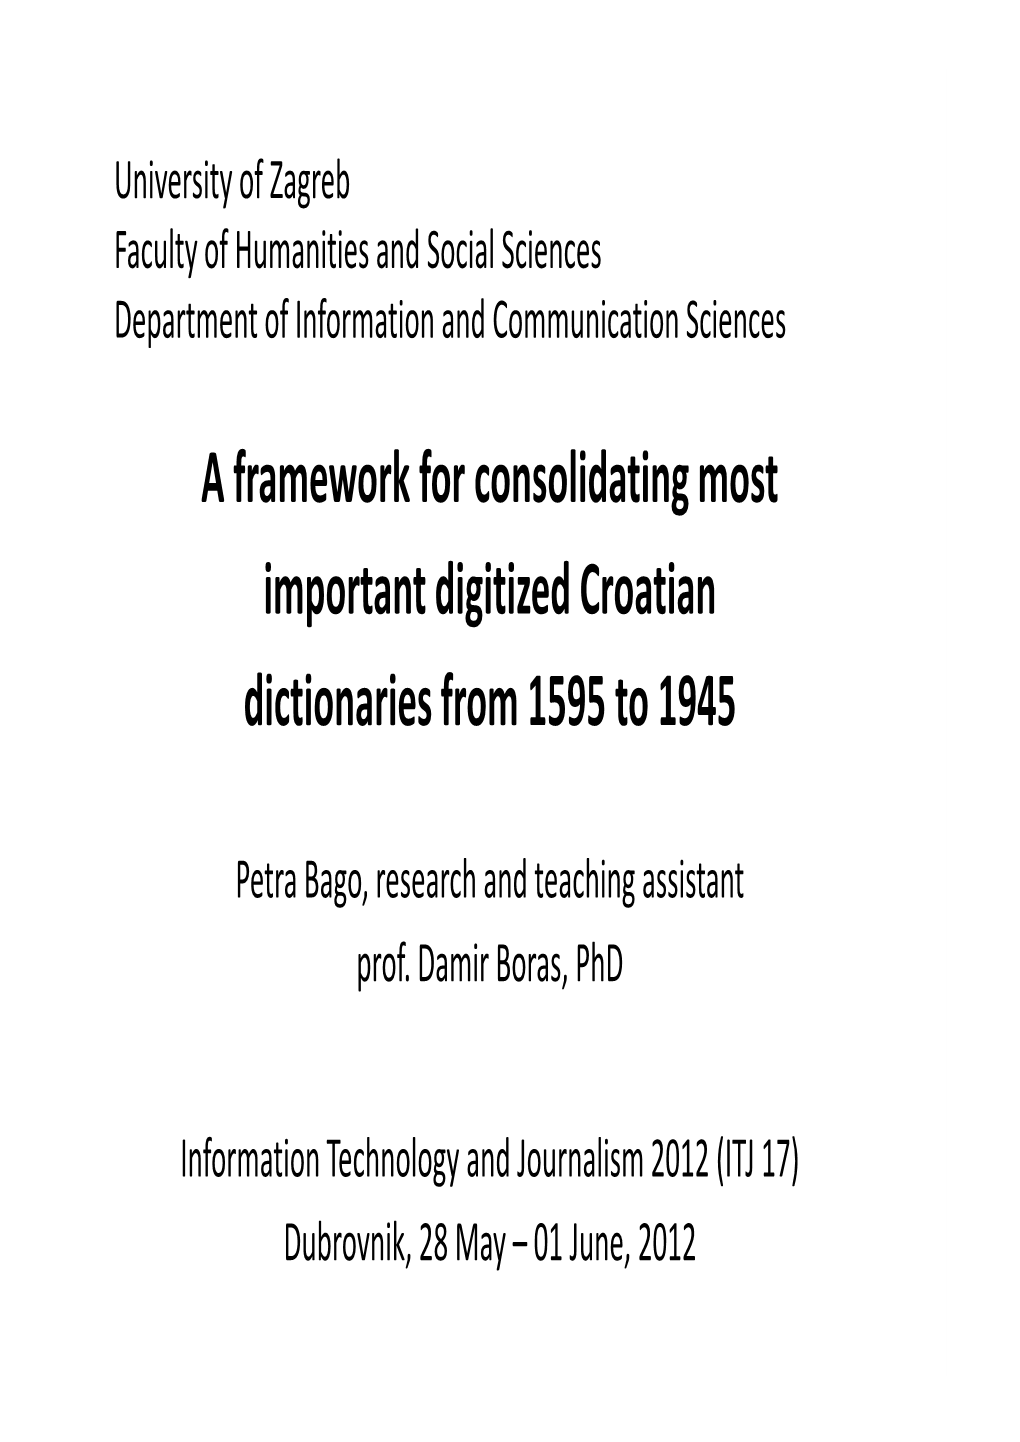 A Framework for Consolidating Most Important Digitized Croatian Dictionaries from 1595 to 1945